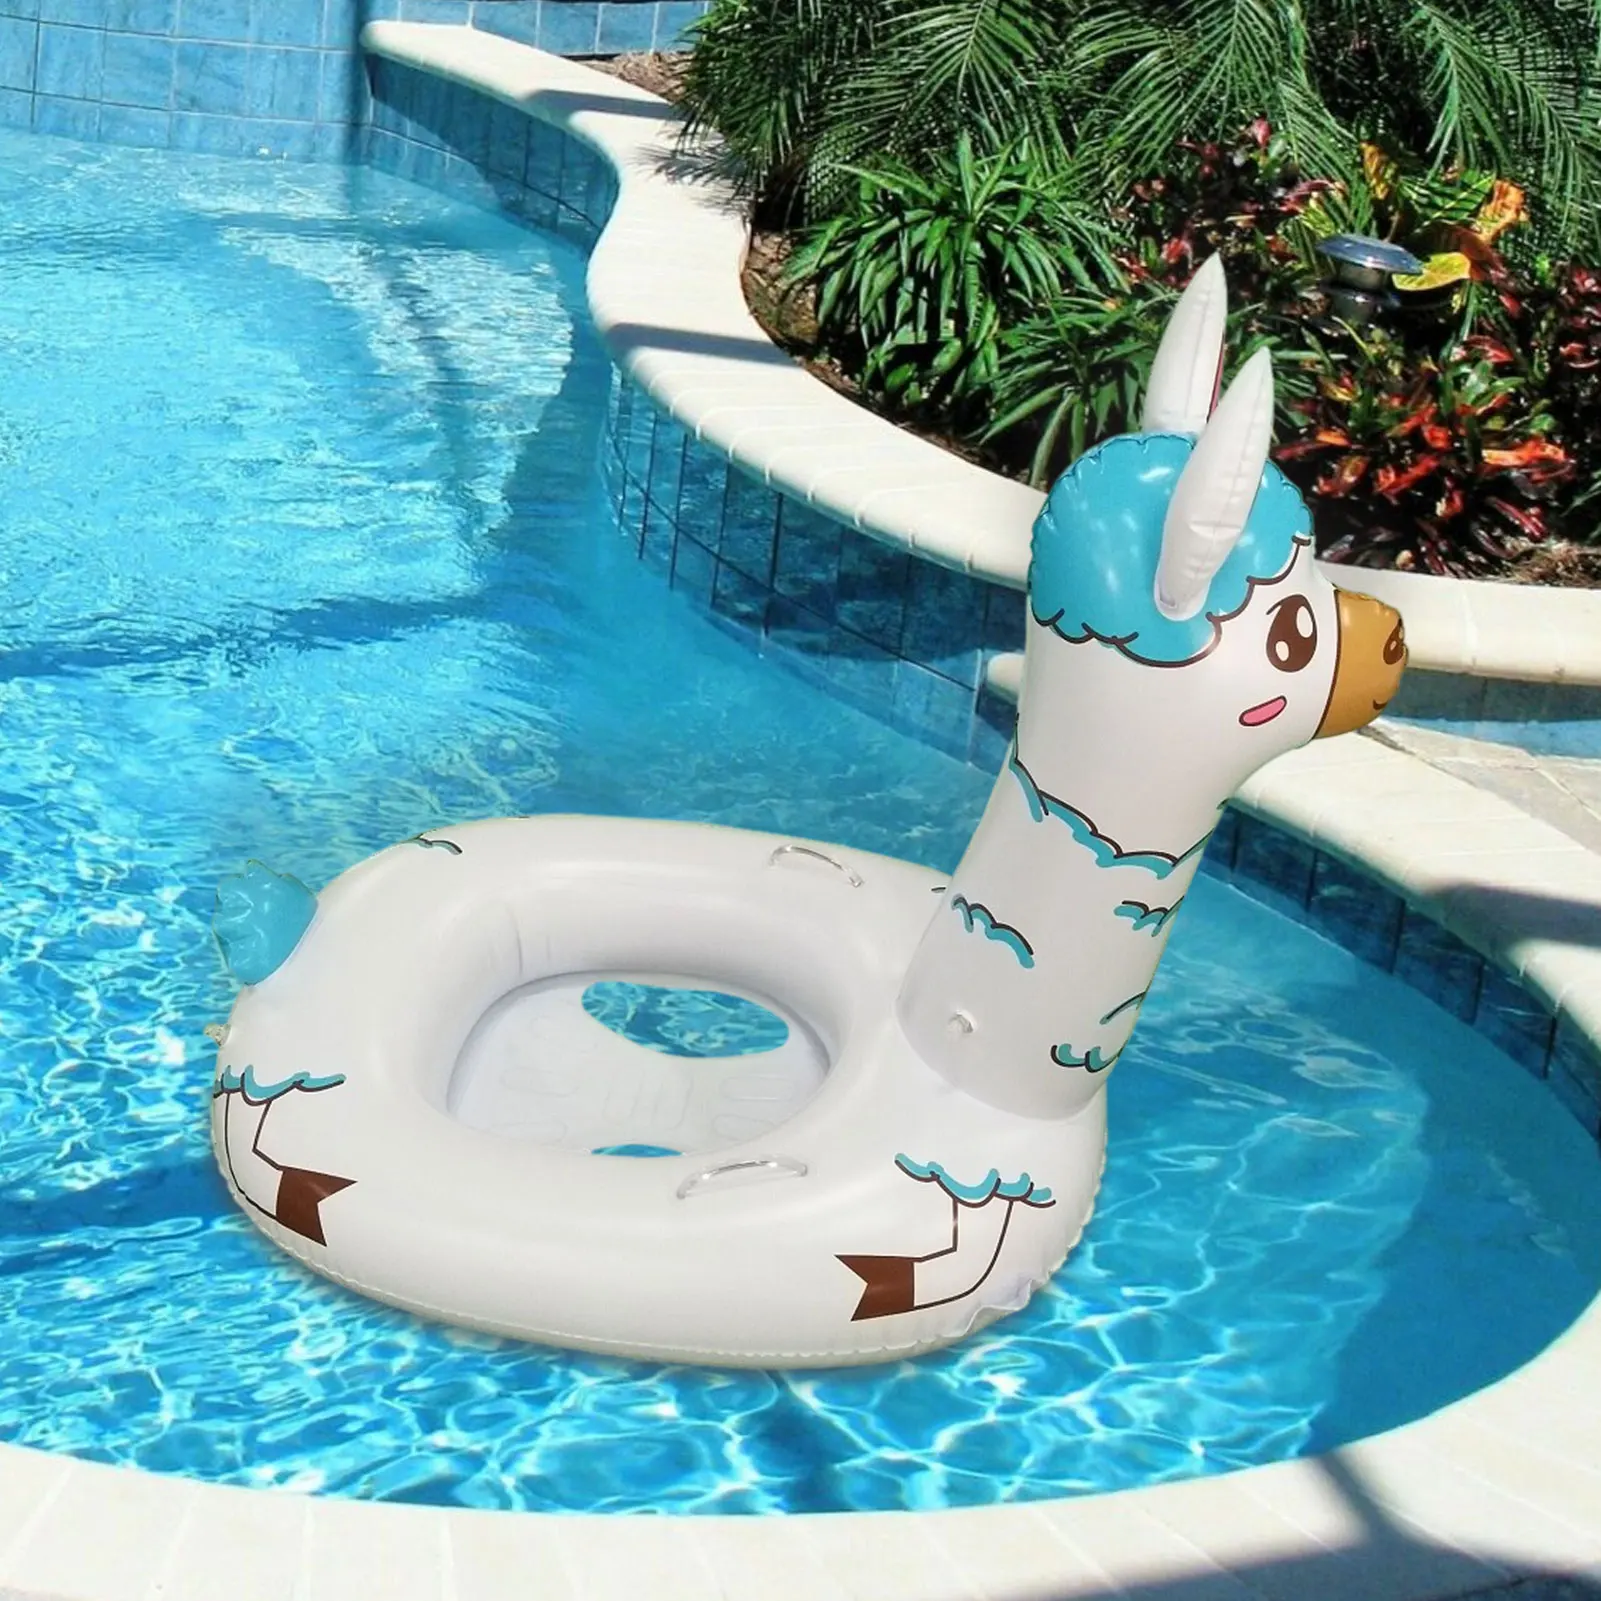 

Pool Floats For Toddlers 1-3 Alpaca Baby Pool Floaty Rideable Iatable For Toddlers Under 8 Years Old Rideable Alpaca Pattern